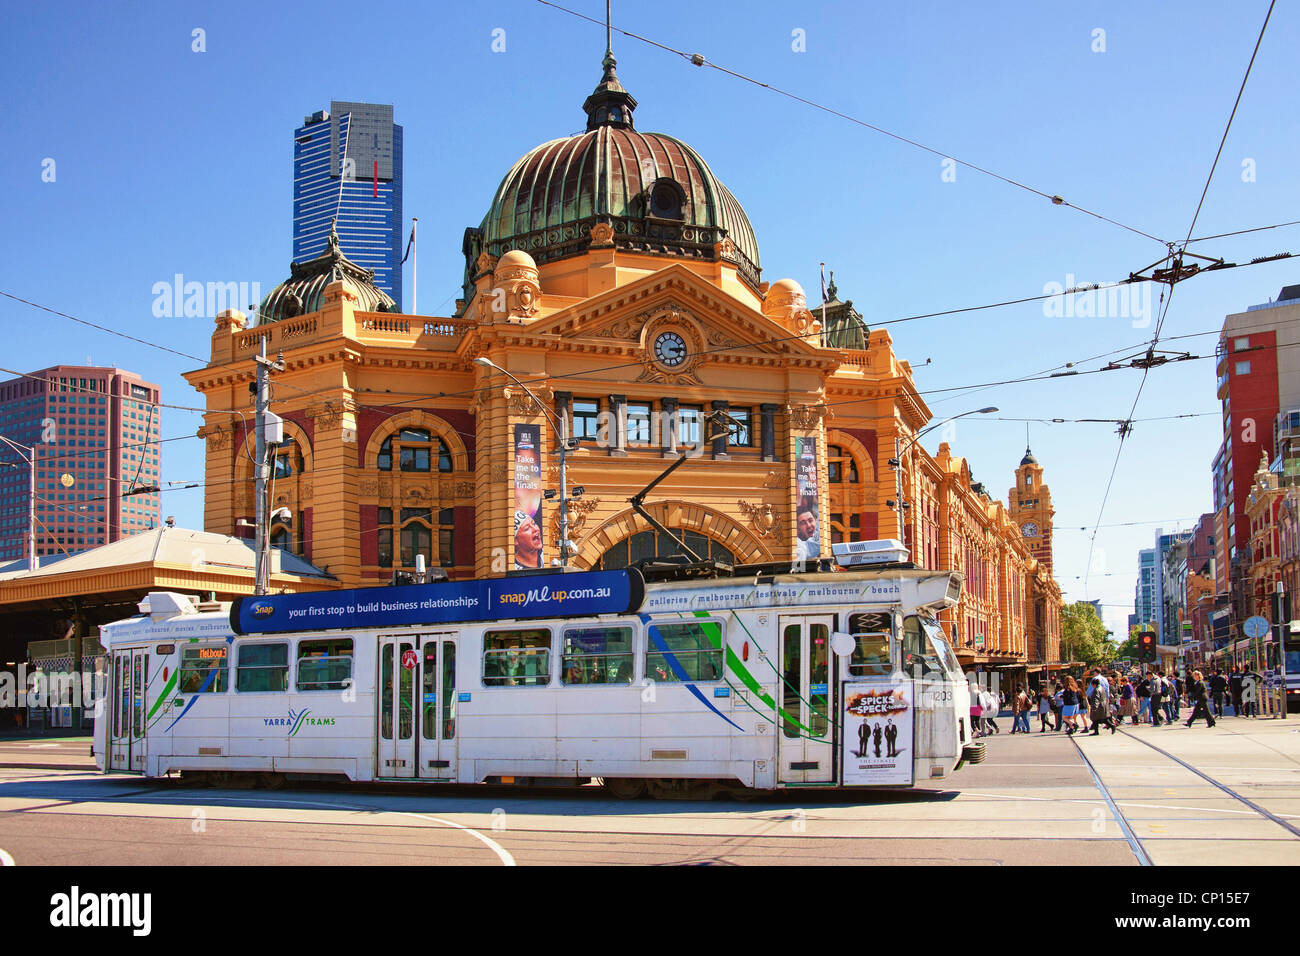 melbourne tram in front of flinders street train station Stock Photo